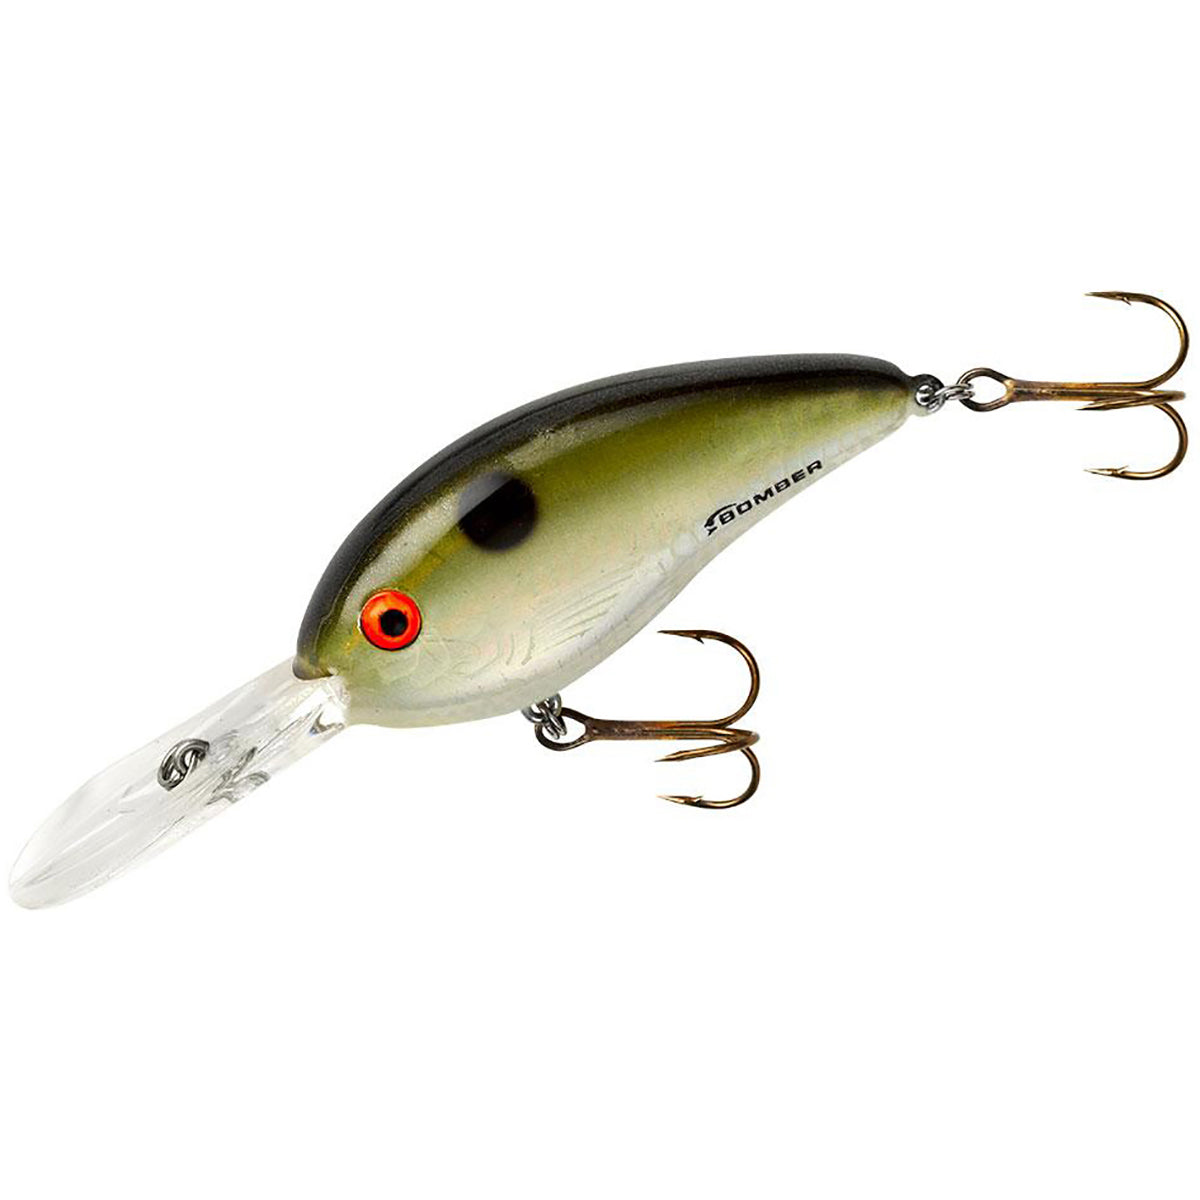 Bomber Fat Free Fingerling 3/8 oz Fishing Lure - Tennessee Shad Bomber Lures